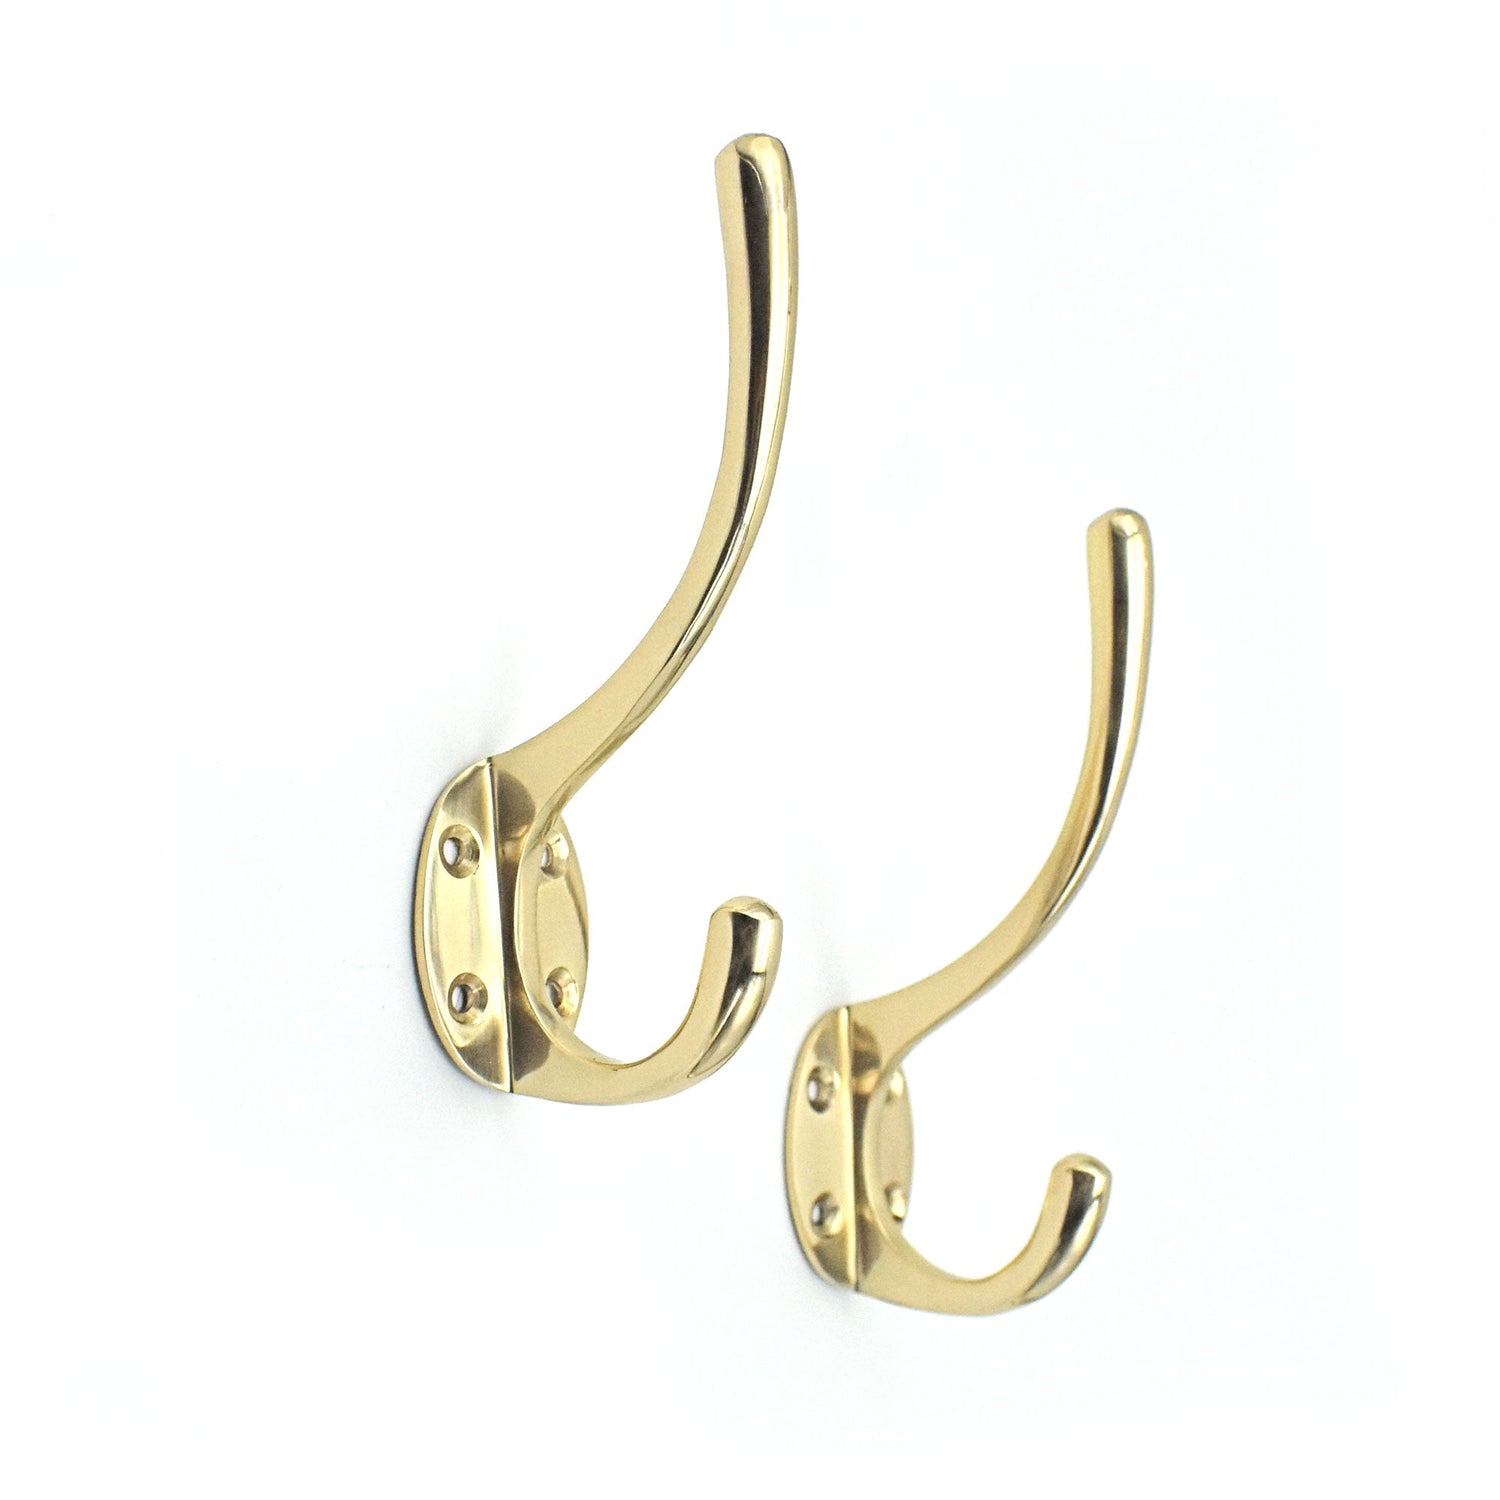 Seneca Solid Brass Coat and Towel Wall Hook – Spruce and Pop